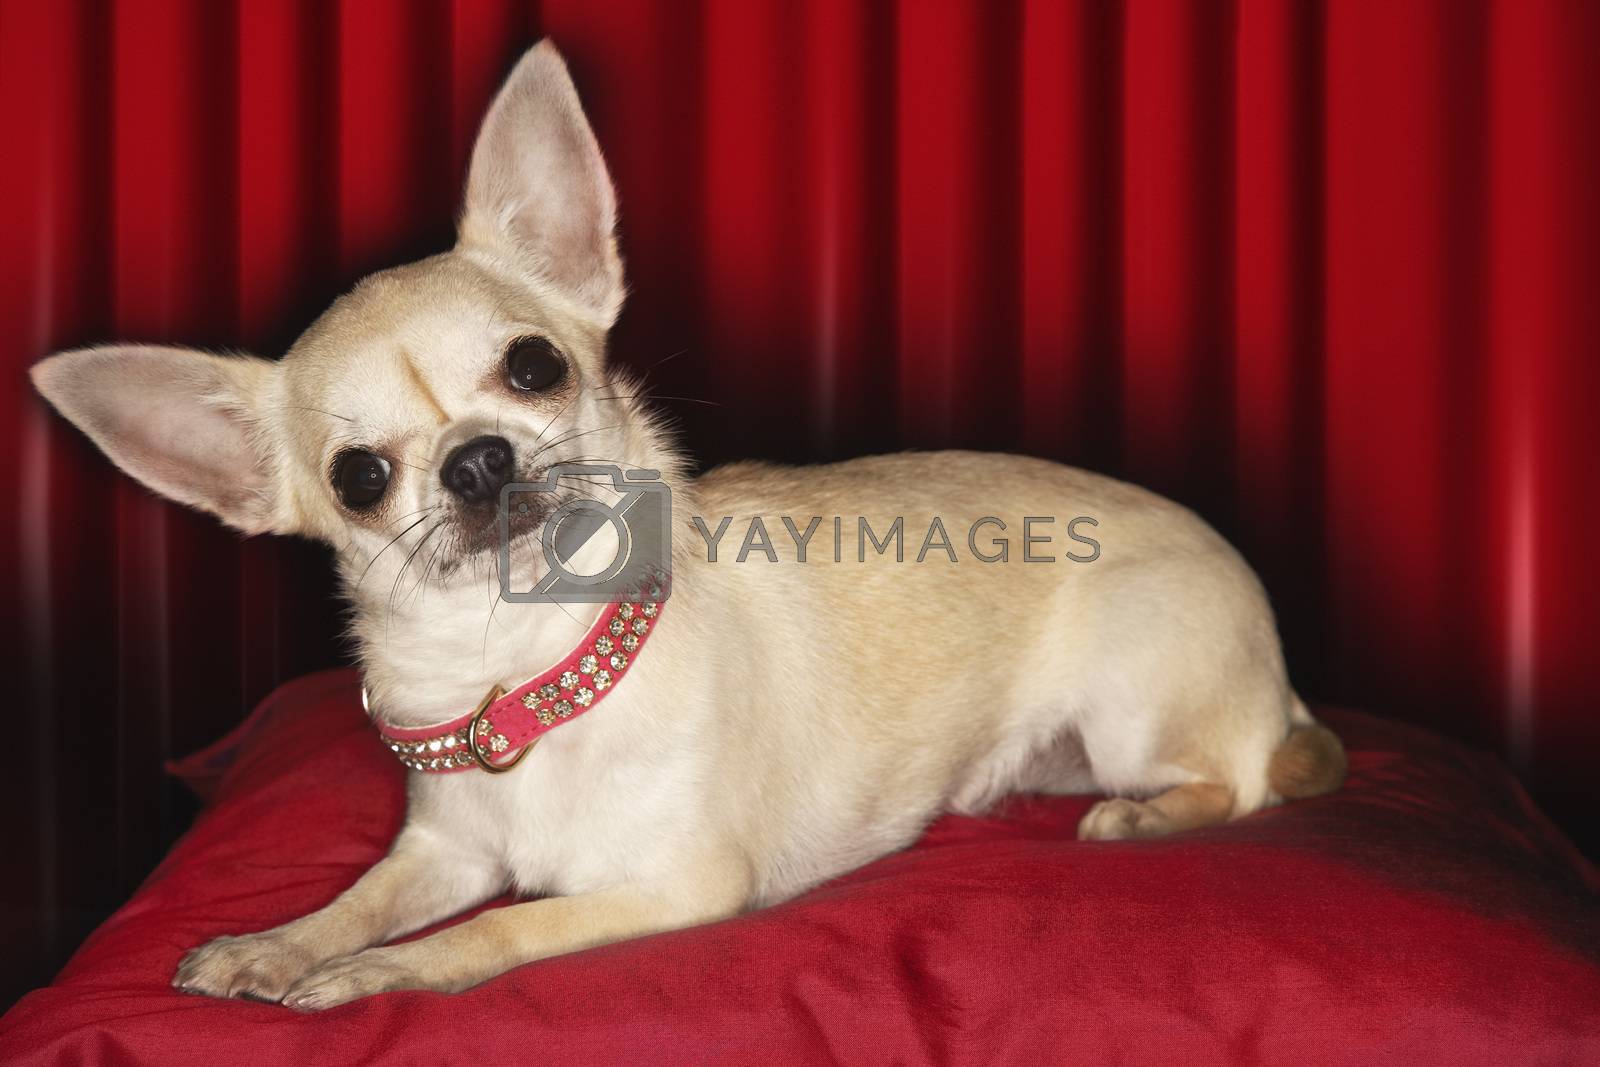 Royalty free image of Chihuahua lying on red pillow by moodboard